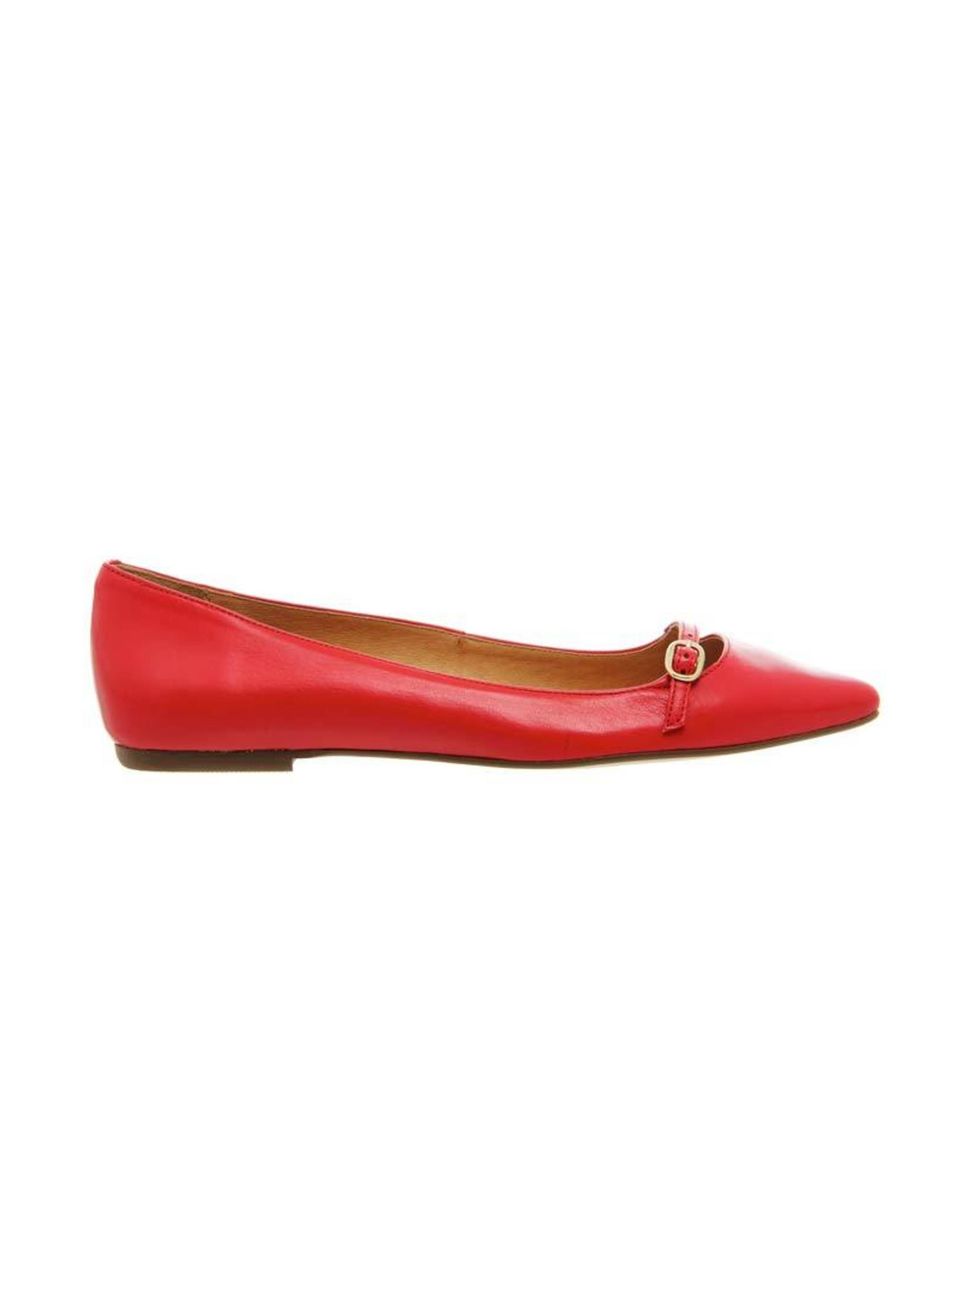 <p>Executive Fashion & Beauty Director Kirsty Dale will pair these flats with a printed sun dress. </p>

<p><a href="http://www.office.co.uk/view/product/office_catalog/2,30/2023460195" target="_blank">Office</a> shoes, £55</p>

<p> </p>